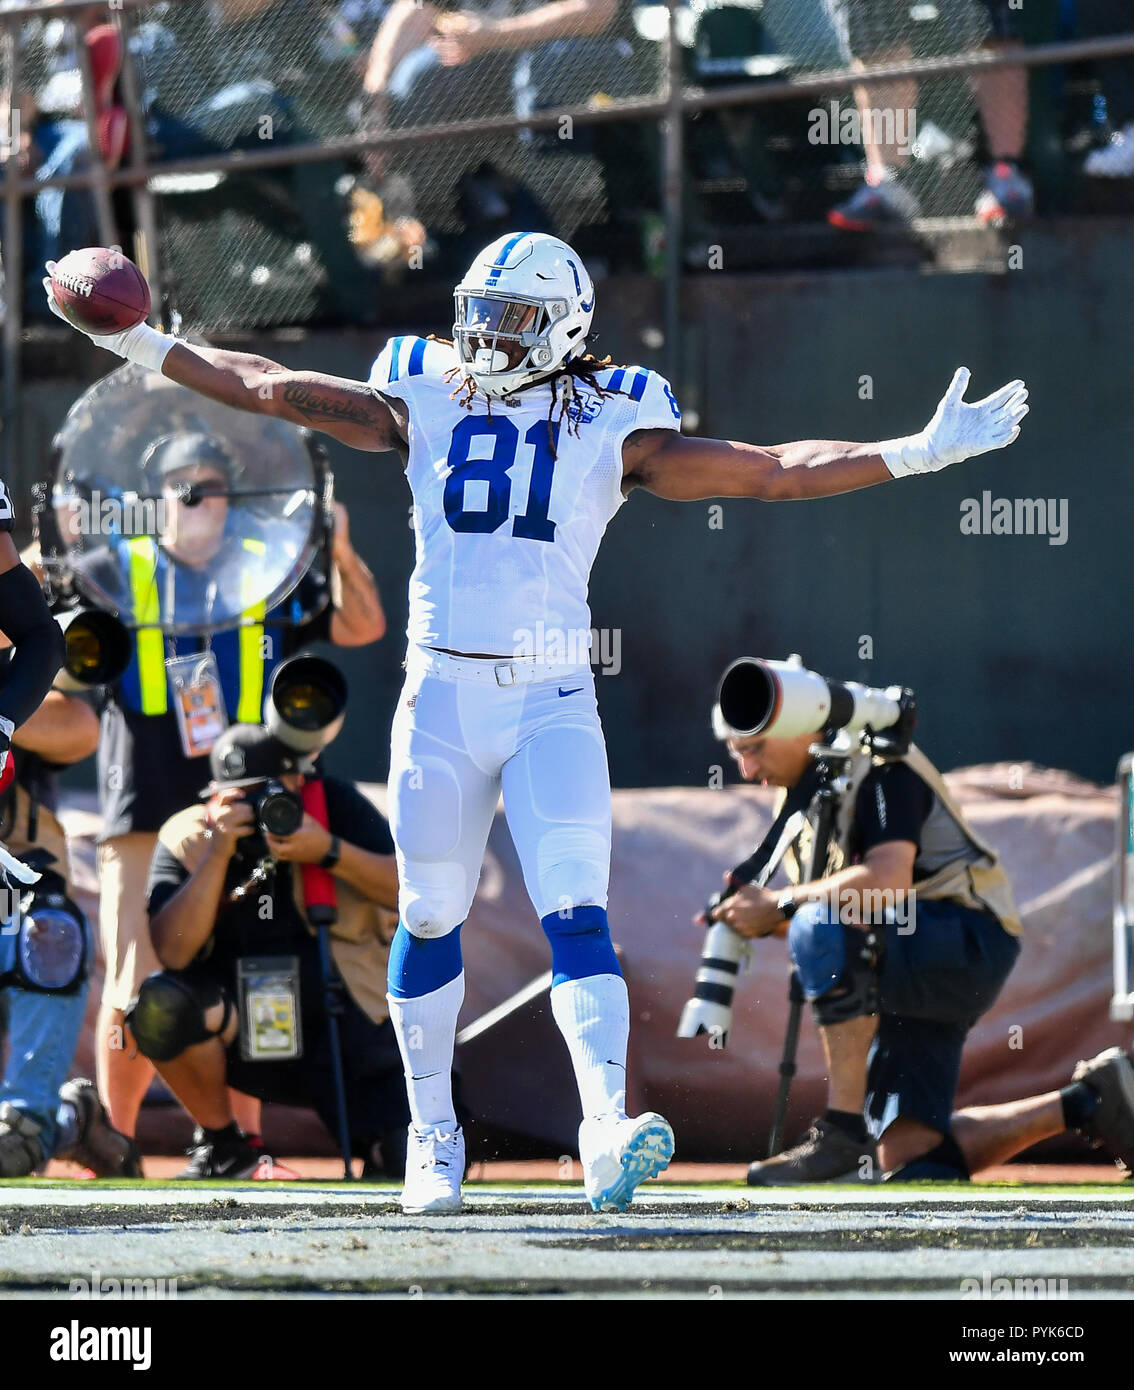 Oakland, CA. 28th Oct, 2018. Indianapolis Colts tight end Mo Alie-Cox (81) celebrates his touchdown catch during the NFL football game between the Indianapolis Colts and the Oakland Raiders at the Oakland Alameda Coliseum in Oakland, CA. Chris Brown/CSM/Alamy Live News Stock Photo